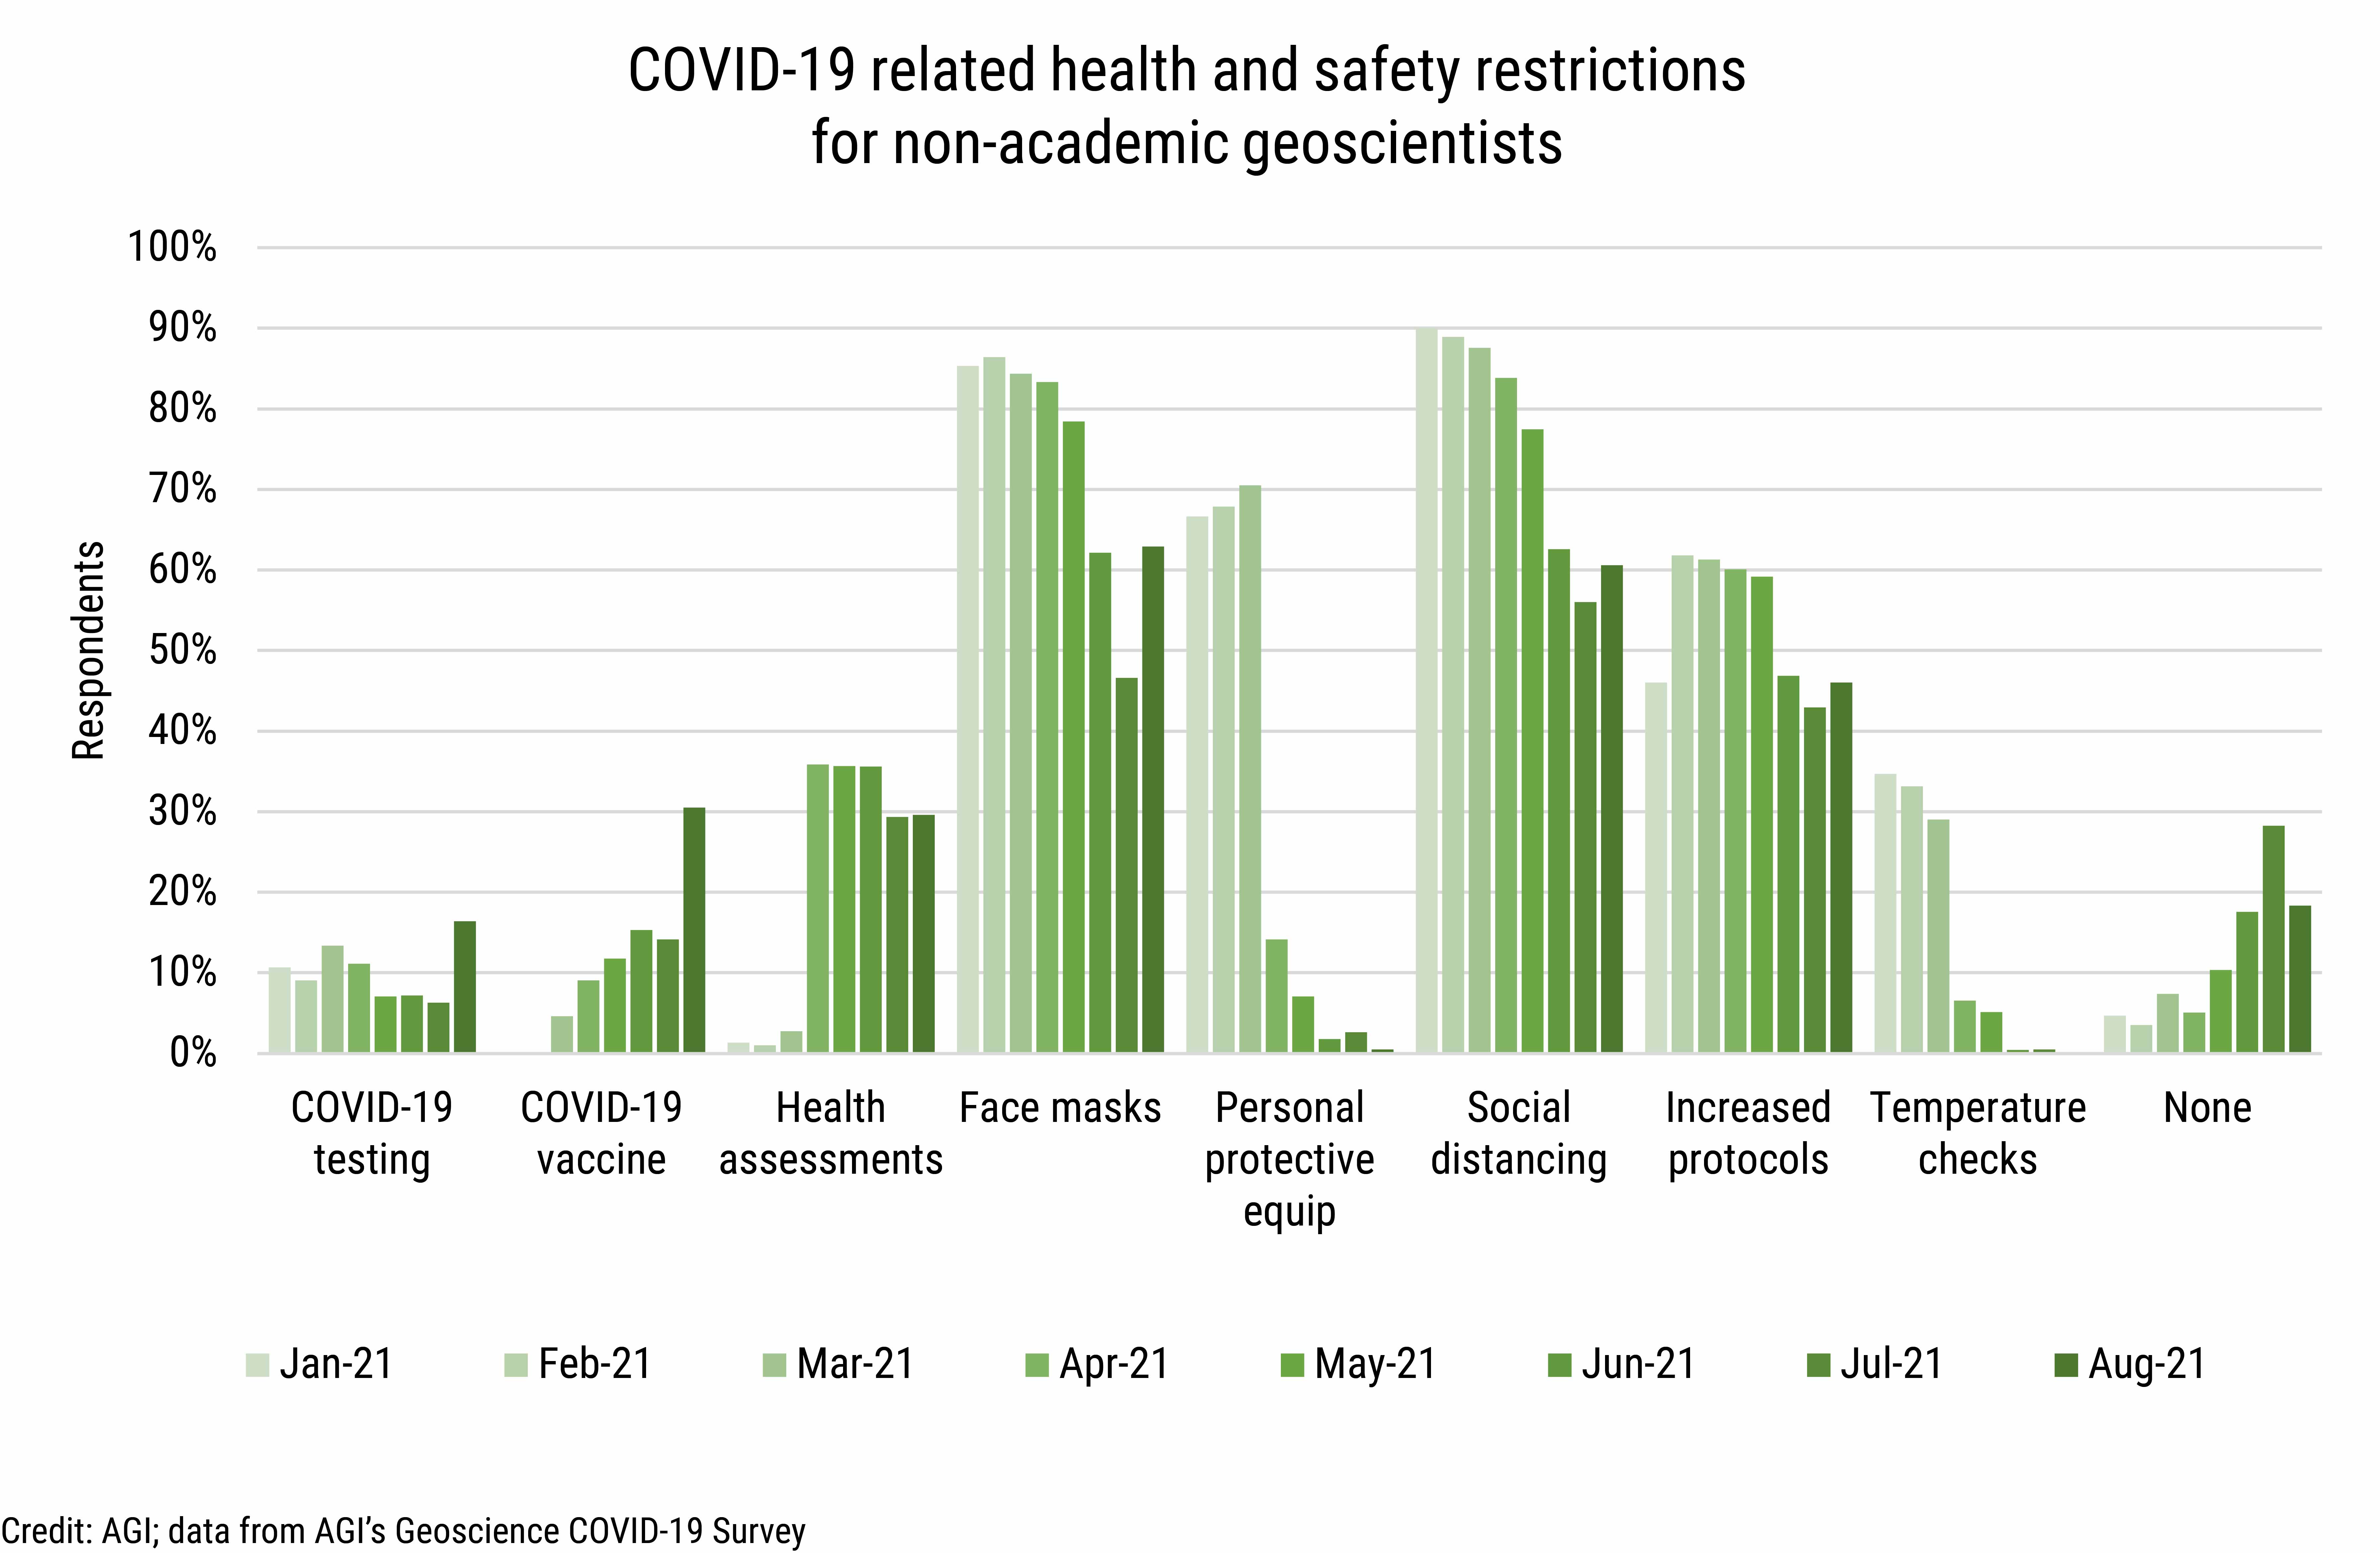 DB_2021-031 chart 04: COVID-19 related health and safety restrictions for non-academic gesocientists (Credit: AGI; data from AGI's Geoscience COVID-19 Survey)